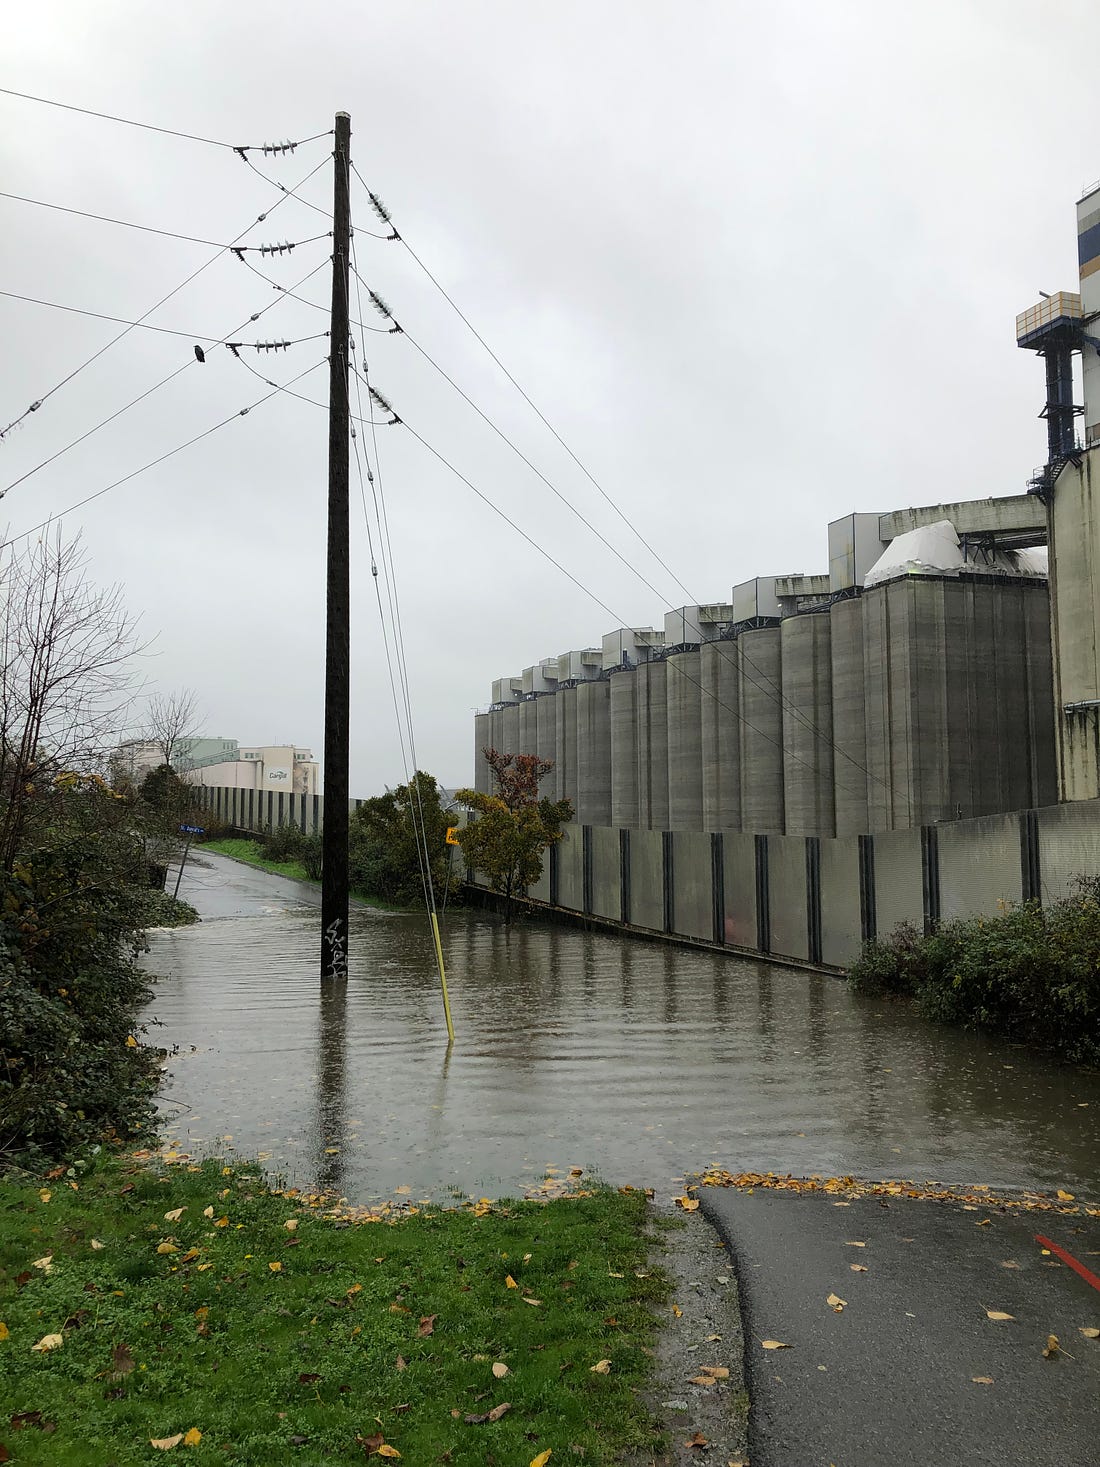 a one-lane road is visible in the foreground and background with a huge pool of floodwater in the middle. A power pole juts out at one edge, and the grain silos are visible in the right hand side of the photo.